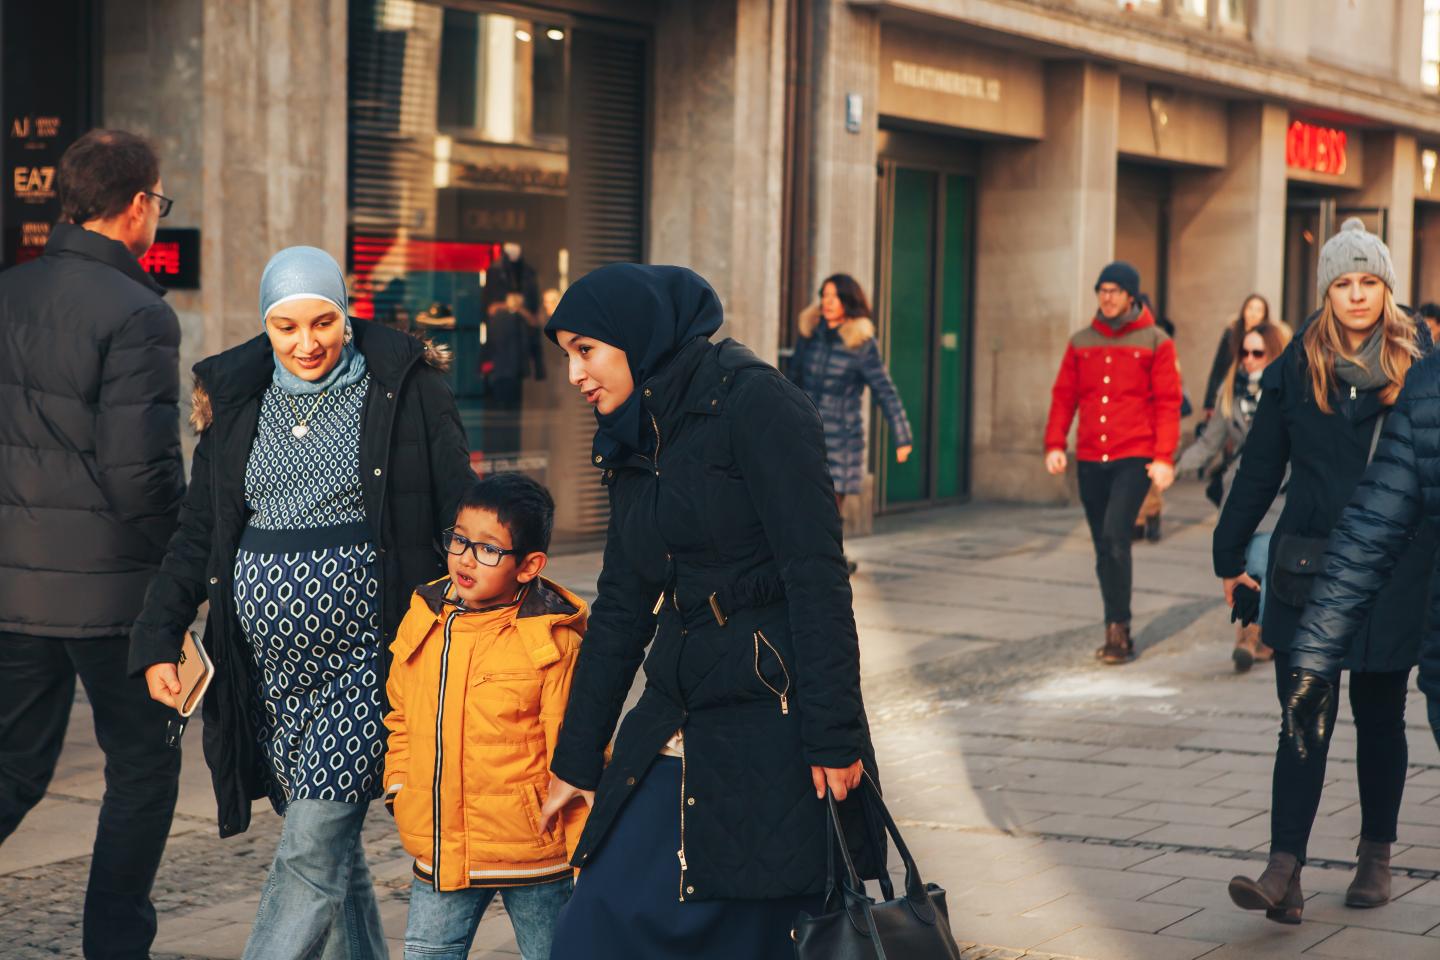 Two adults in hijab with a child walking on a street with other people